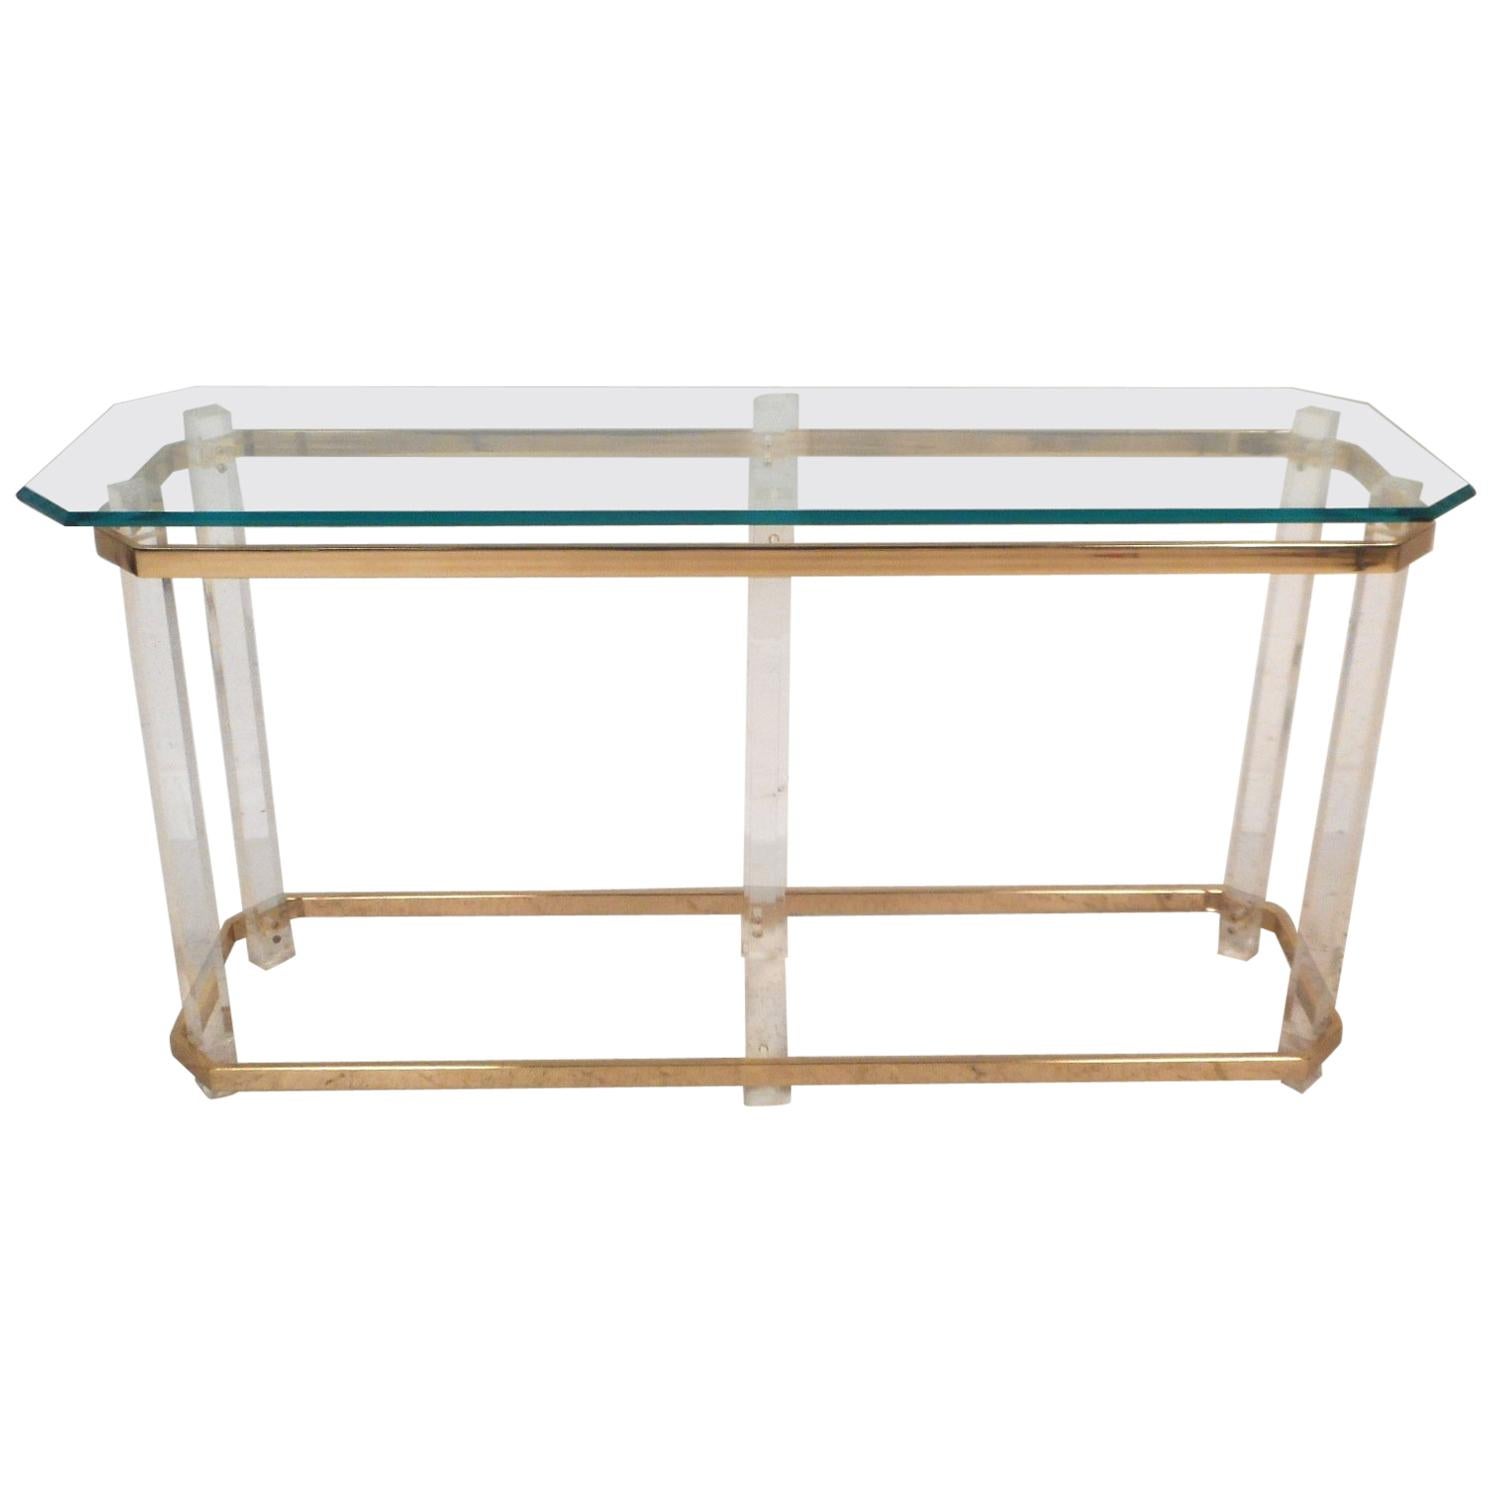 This beautiful vintage modern console table features a Lucite and brass frame with a glass top. An impressive design held together with six Lucite pillars and two flat bar brass wrap-around supports. A thick glass top with bevelled edges and a light